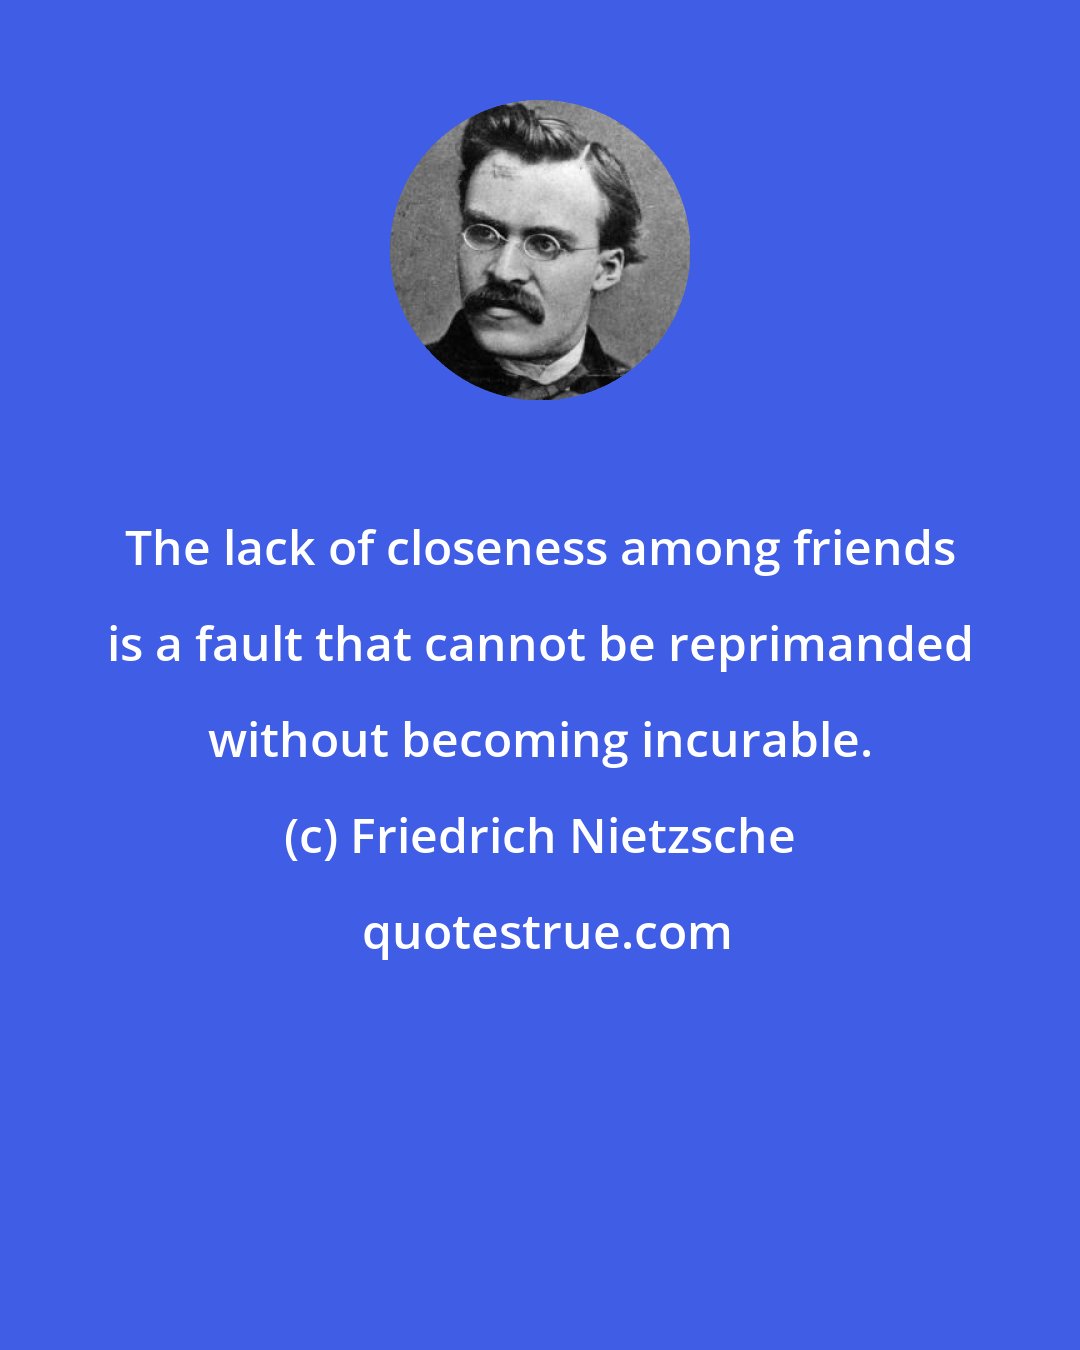 Friedrich Nietzsche: The lack of closeness among friends is a fault that cannot be reprimanded without becoming incurable.